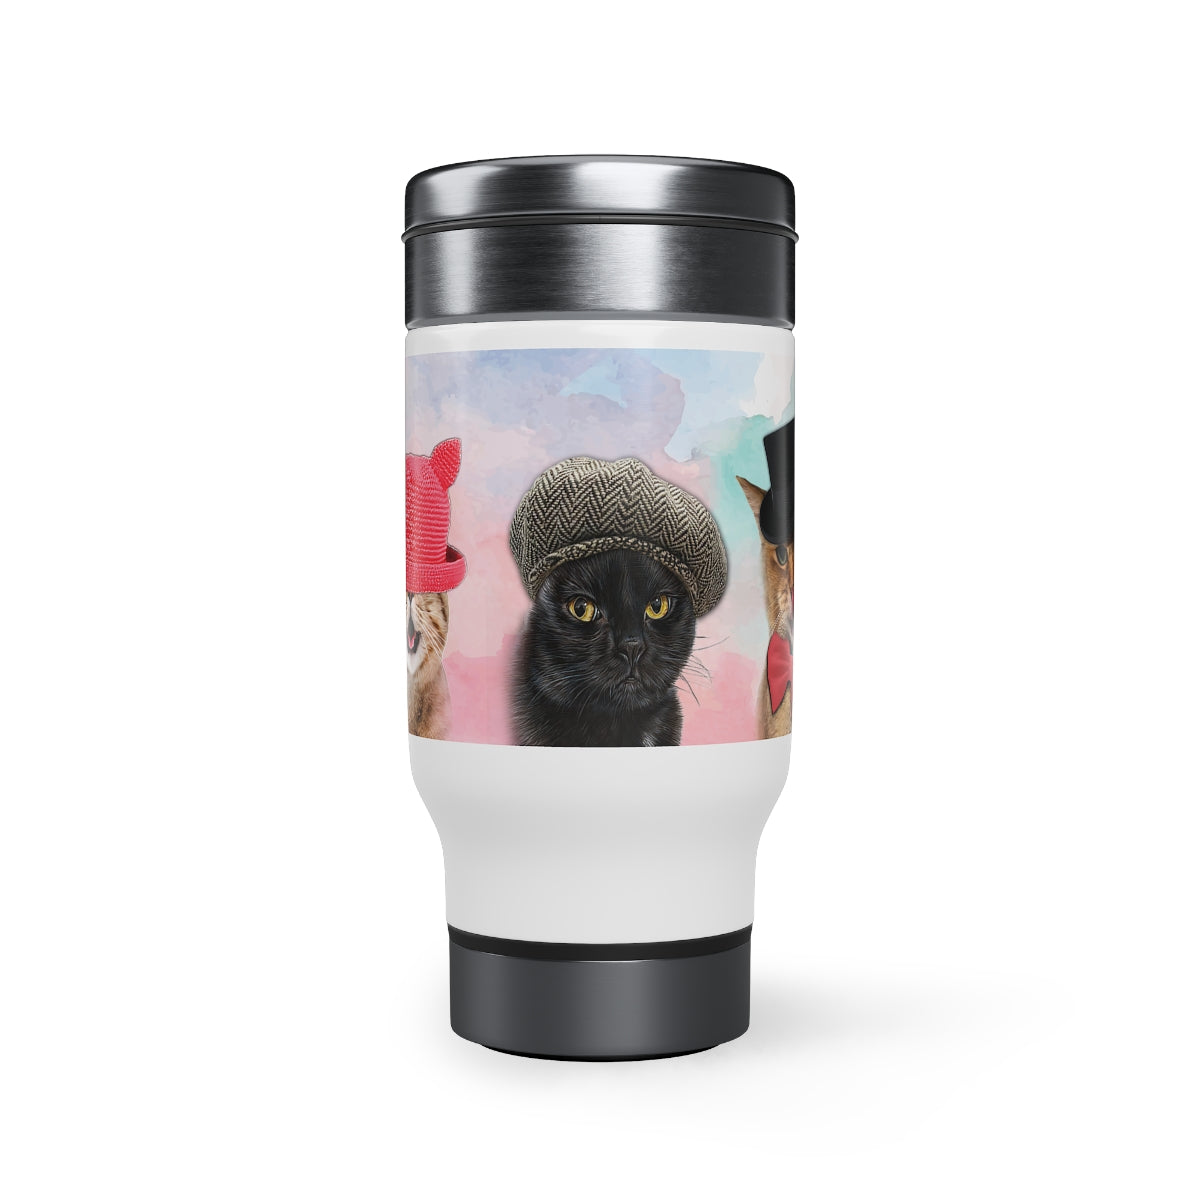 Cats In Hats Travel Mug with Handle, 14oz